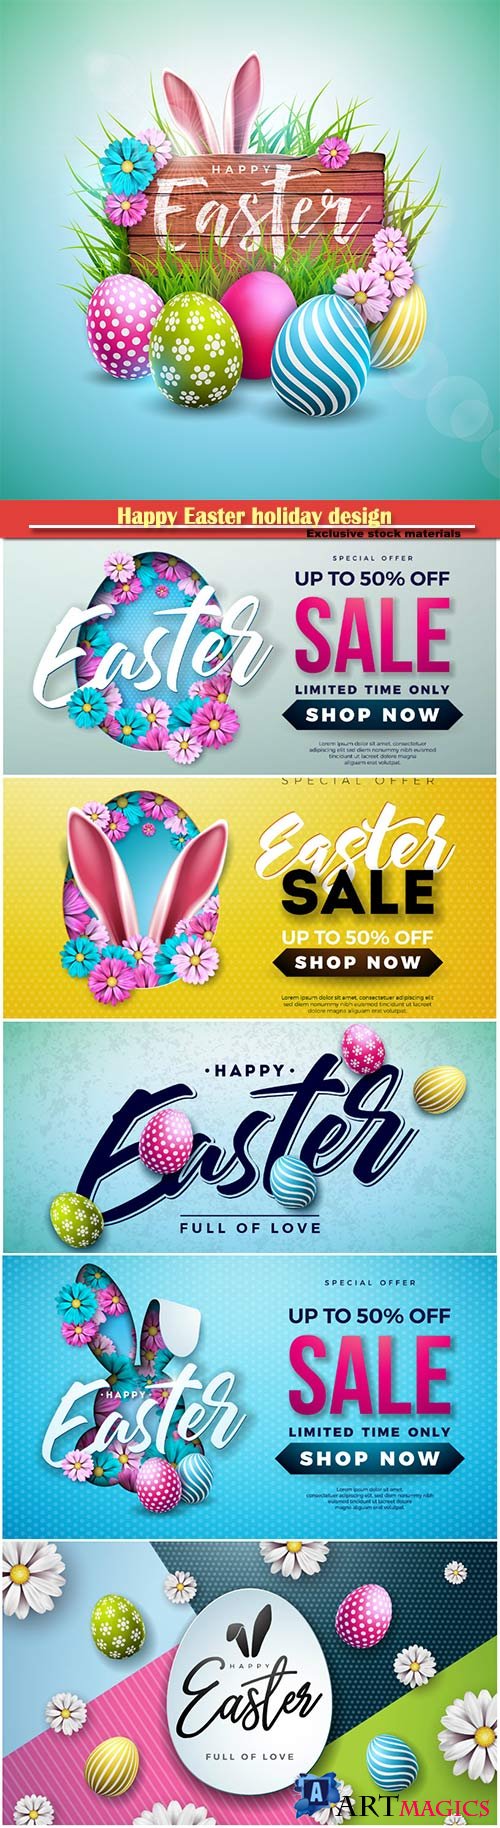 Happy Easter holiday design with painted egg vector illustration